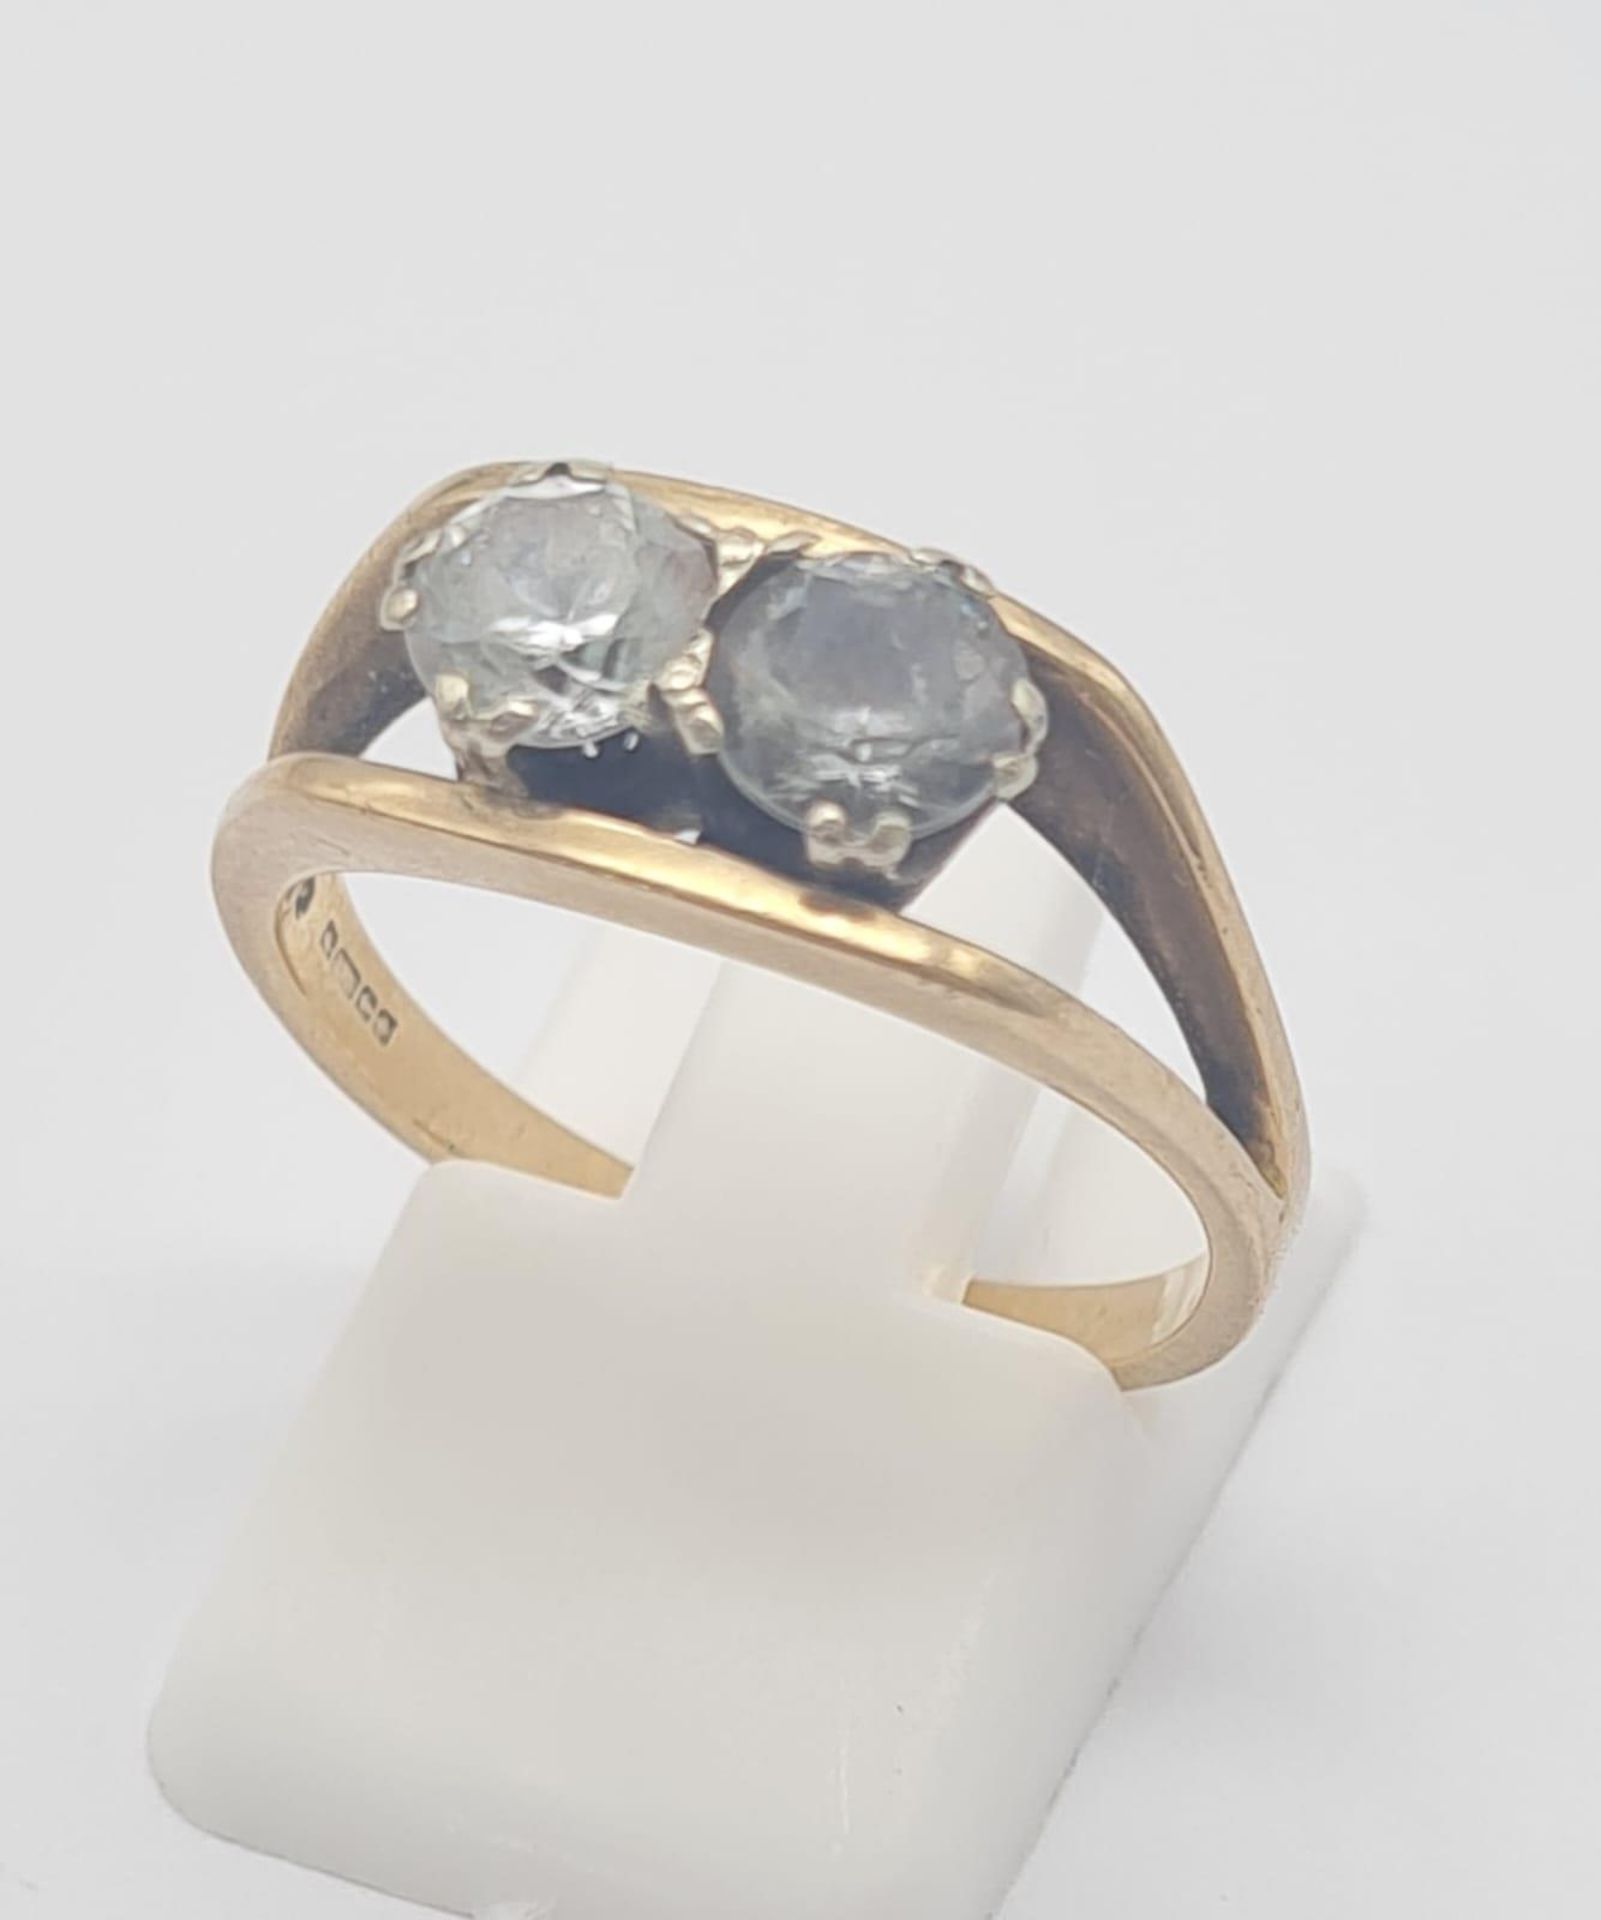 A Vintage 9K Yellow Gold Two Stone Ring. White and grey stone. Size P. 3.6g total weight.